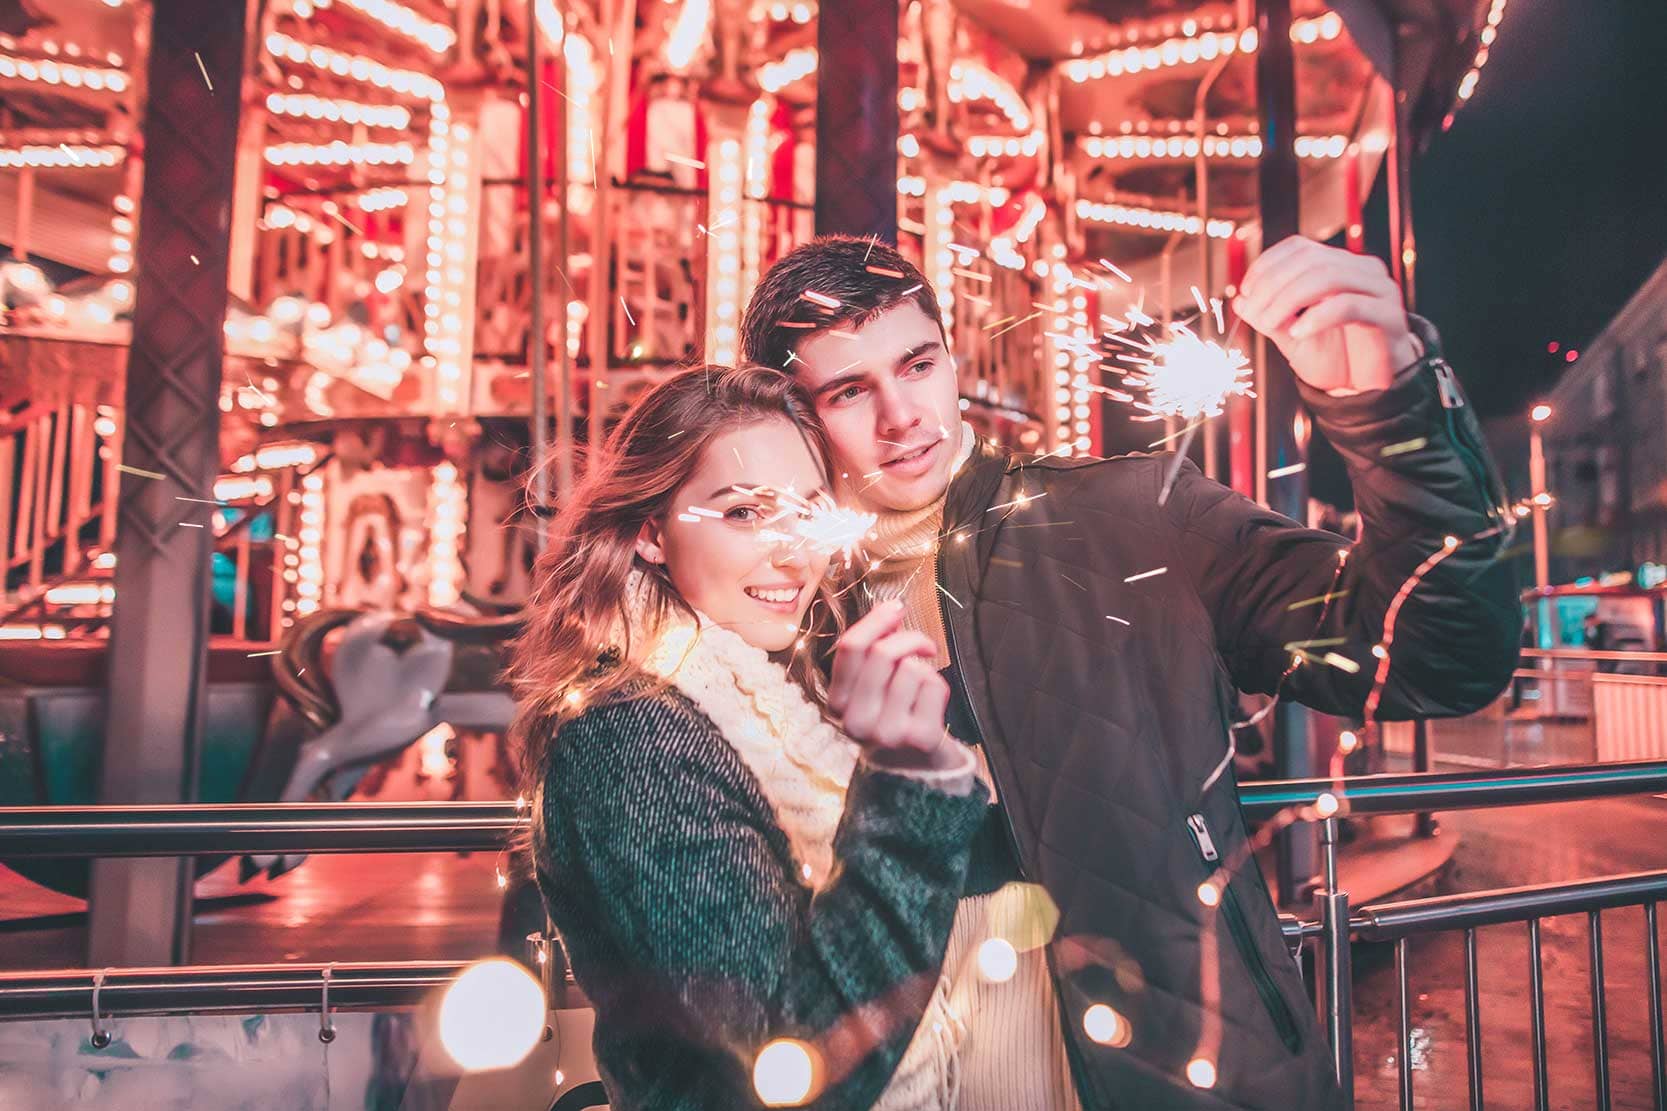 Beautiful Couples at Theme Park (After Presets Applied)